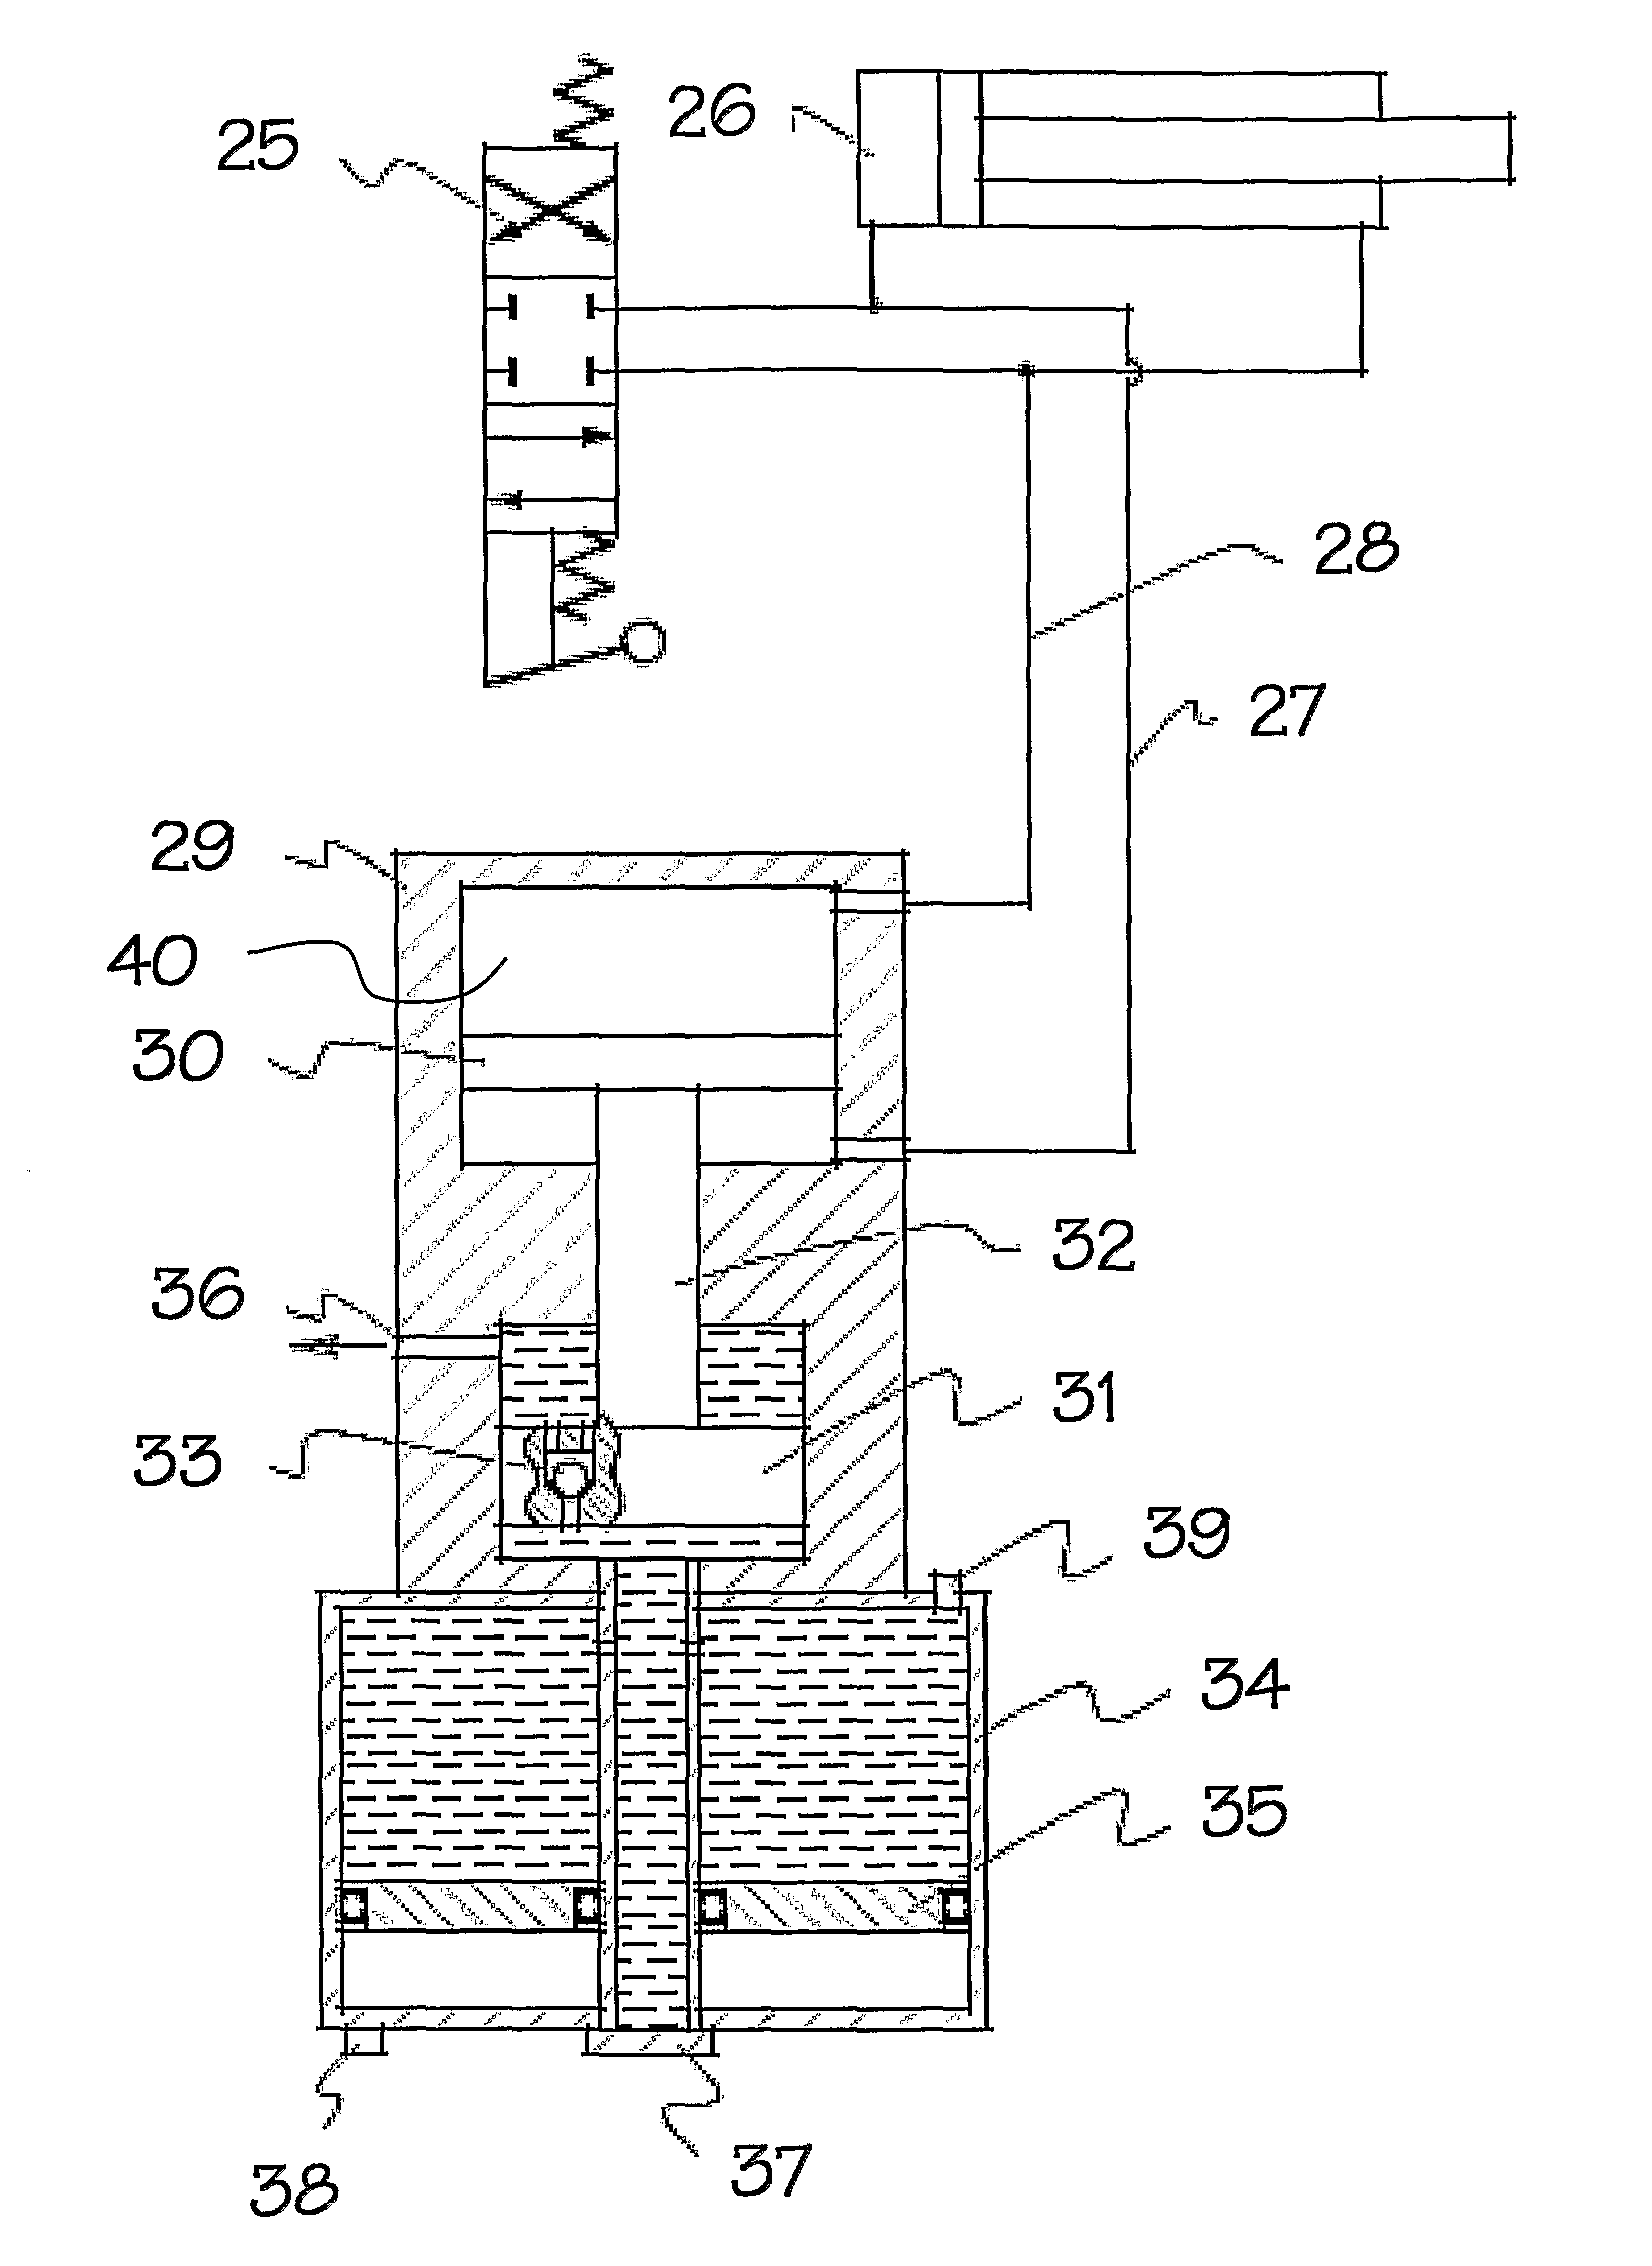 Method and apparatus for purging air from automatic lubrication systems